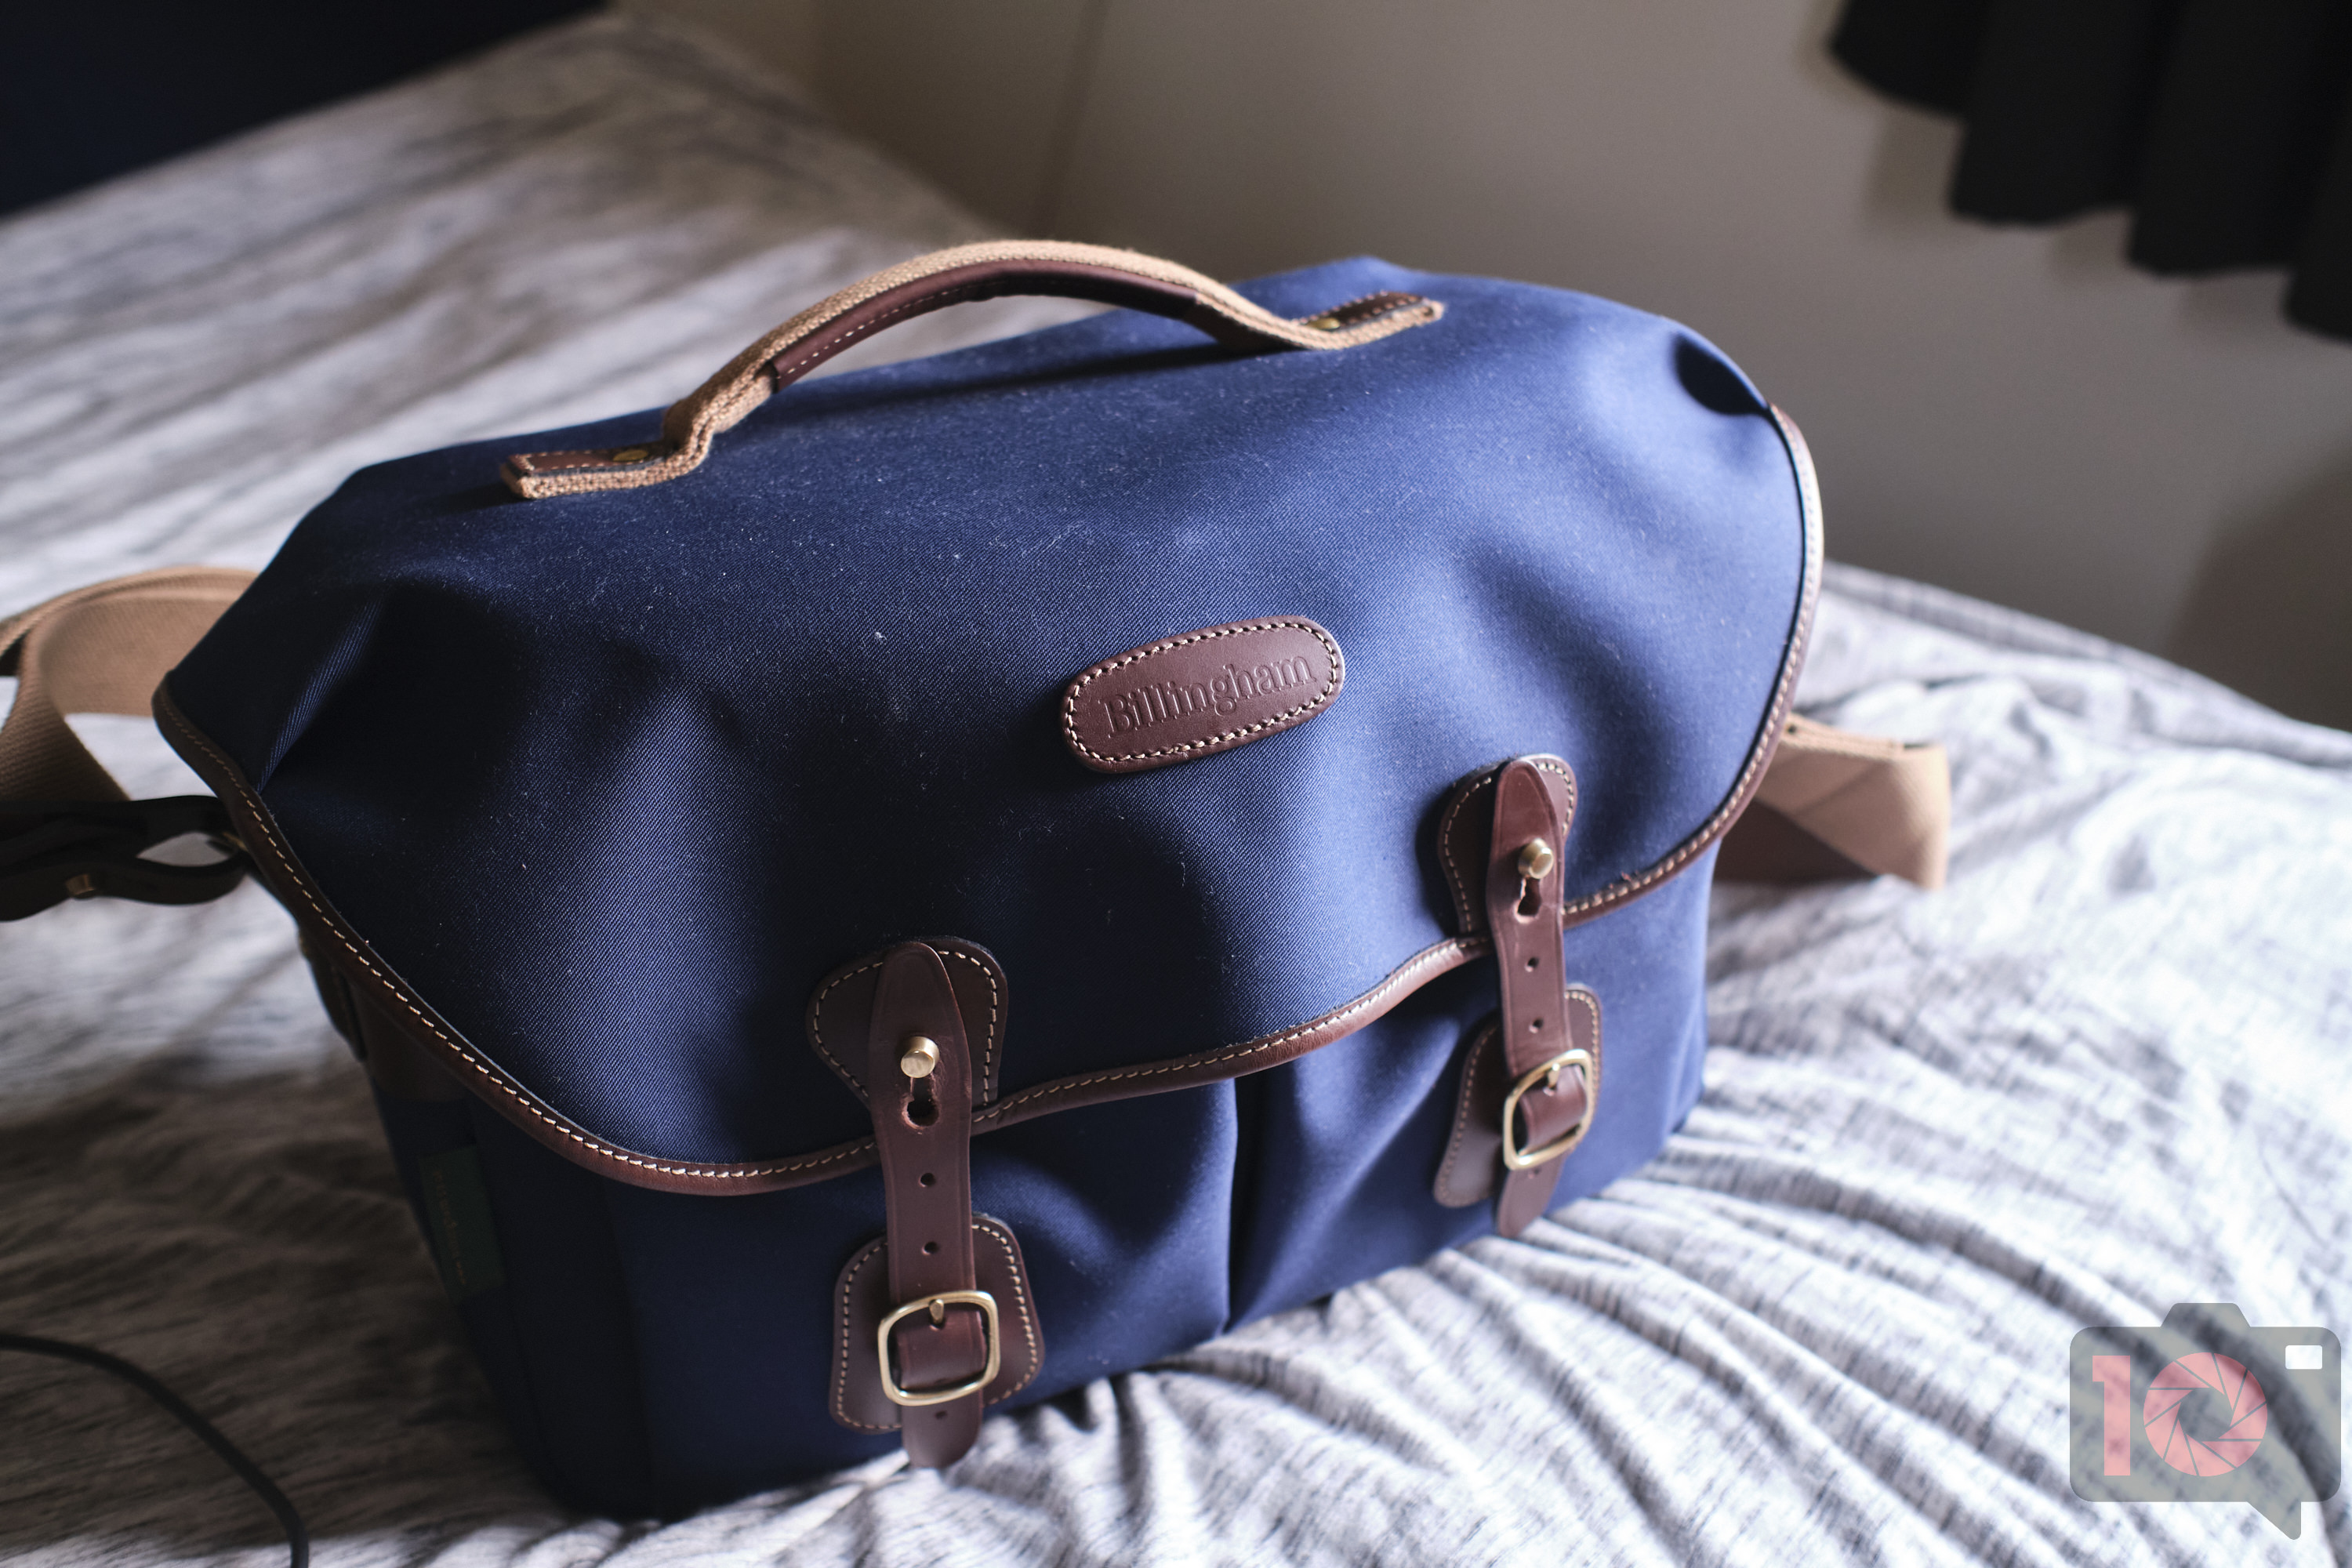 Chris Gampat The Phoblographer Hadley One in Navy and Brown review product images 2.81-120s1600